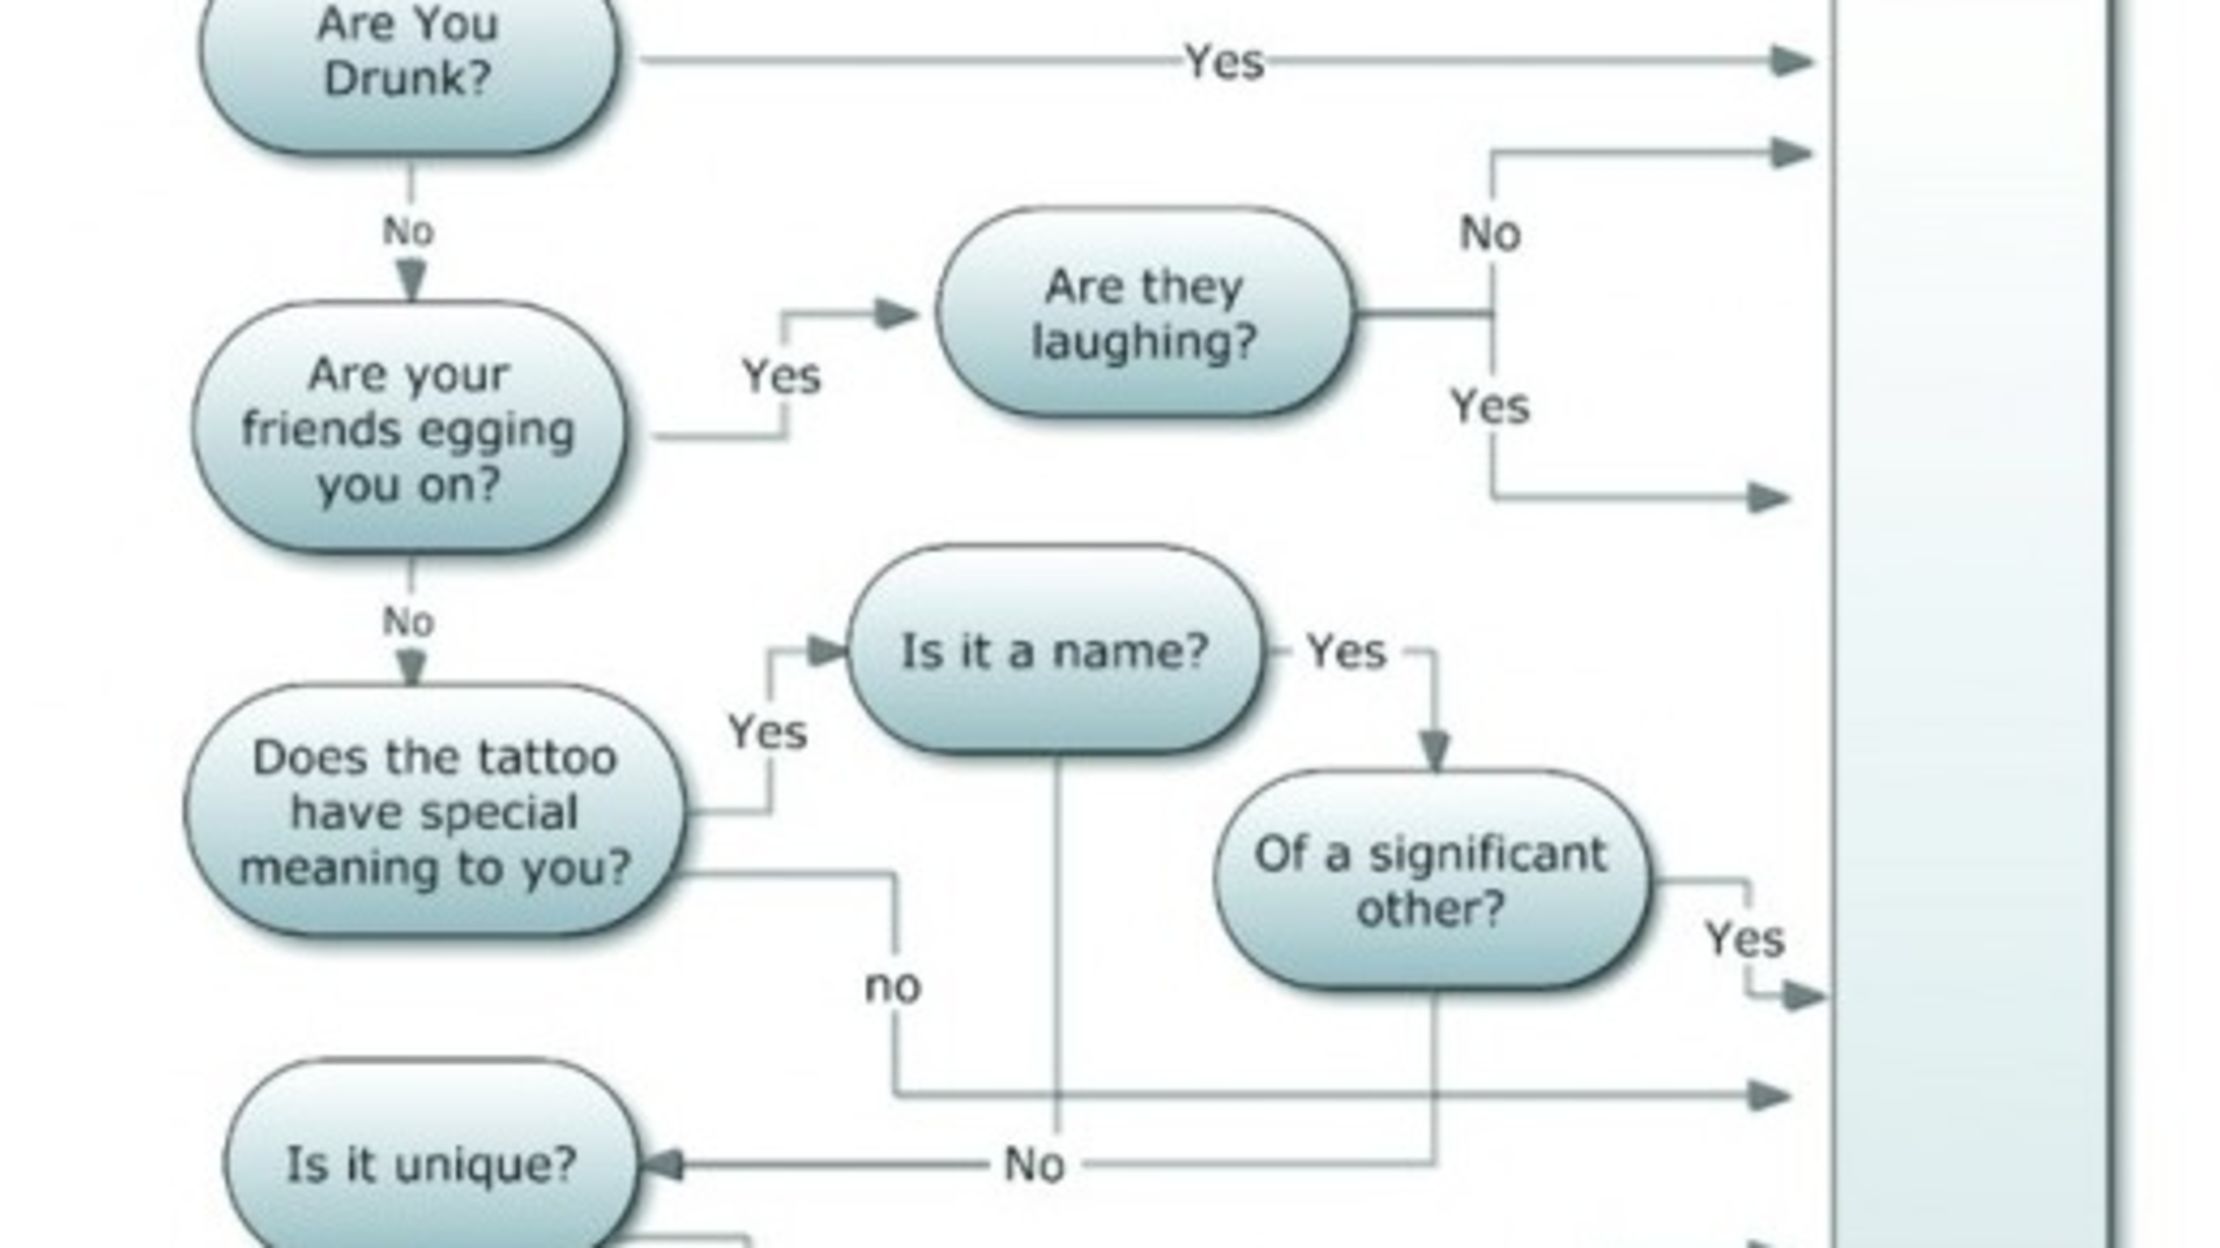 Corporate Flow Chart Funny